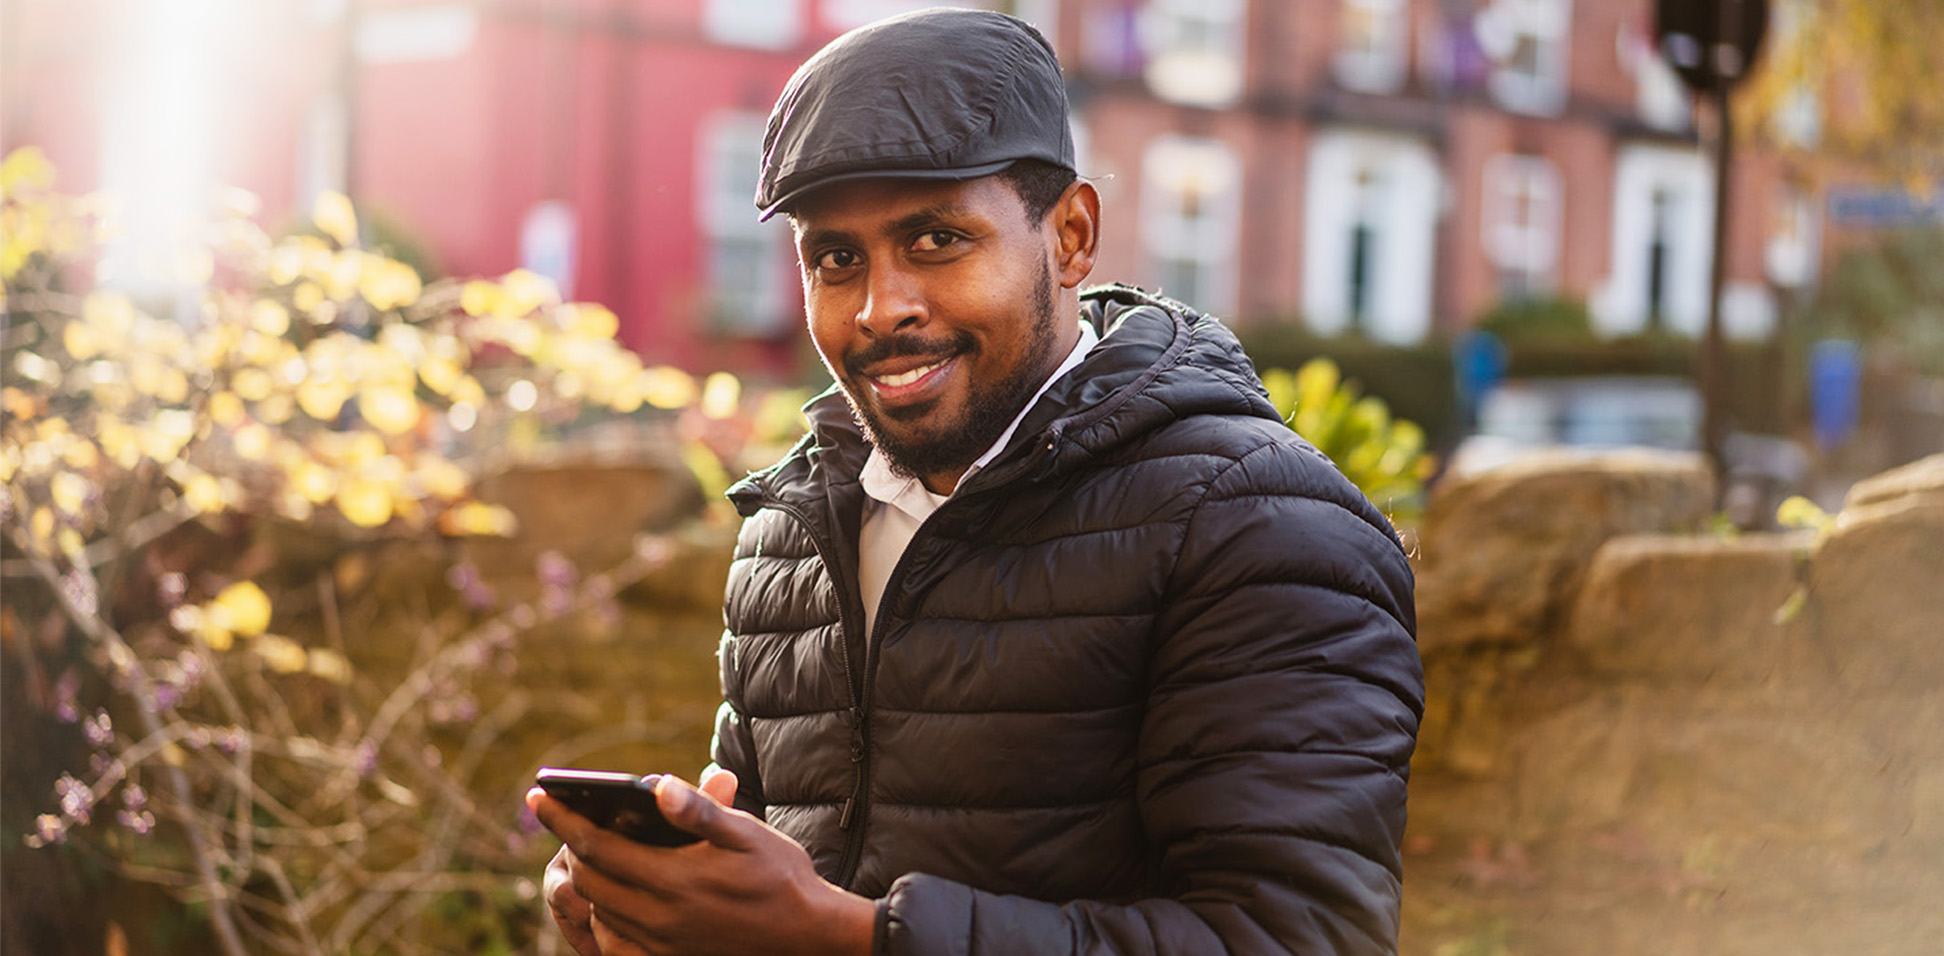 This photo shows a man smiling at the camera, stood outside holding a mobile phone.